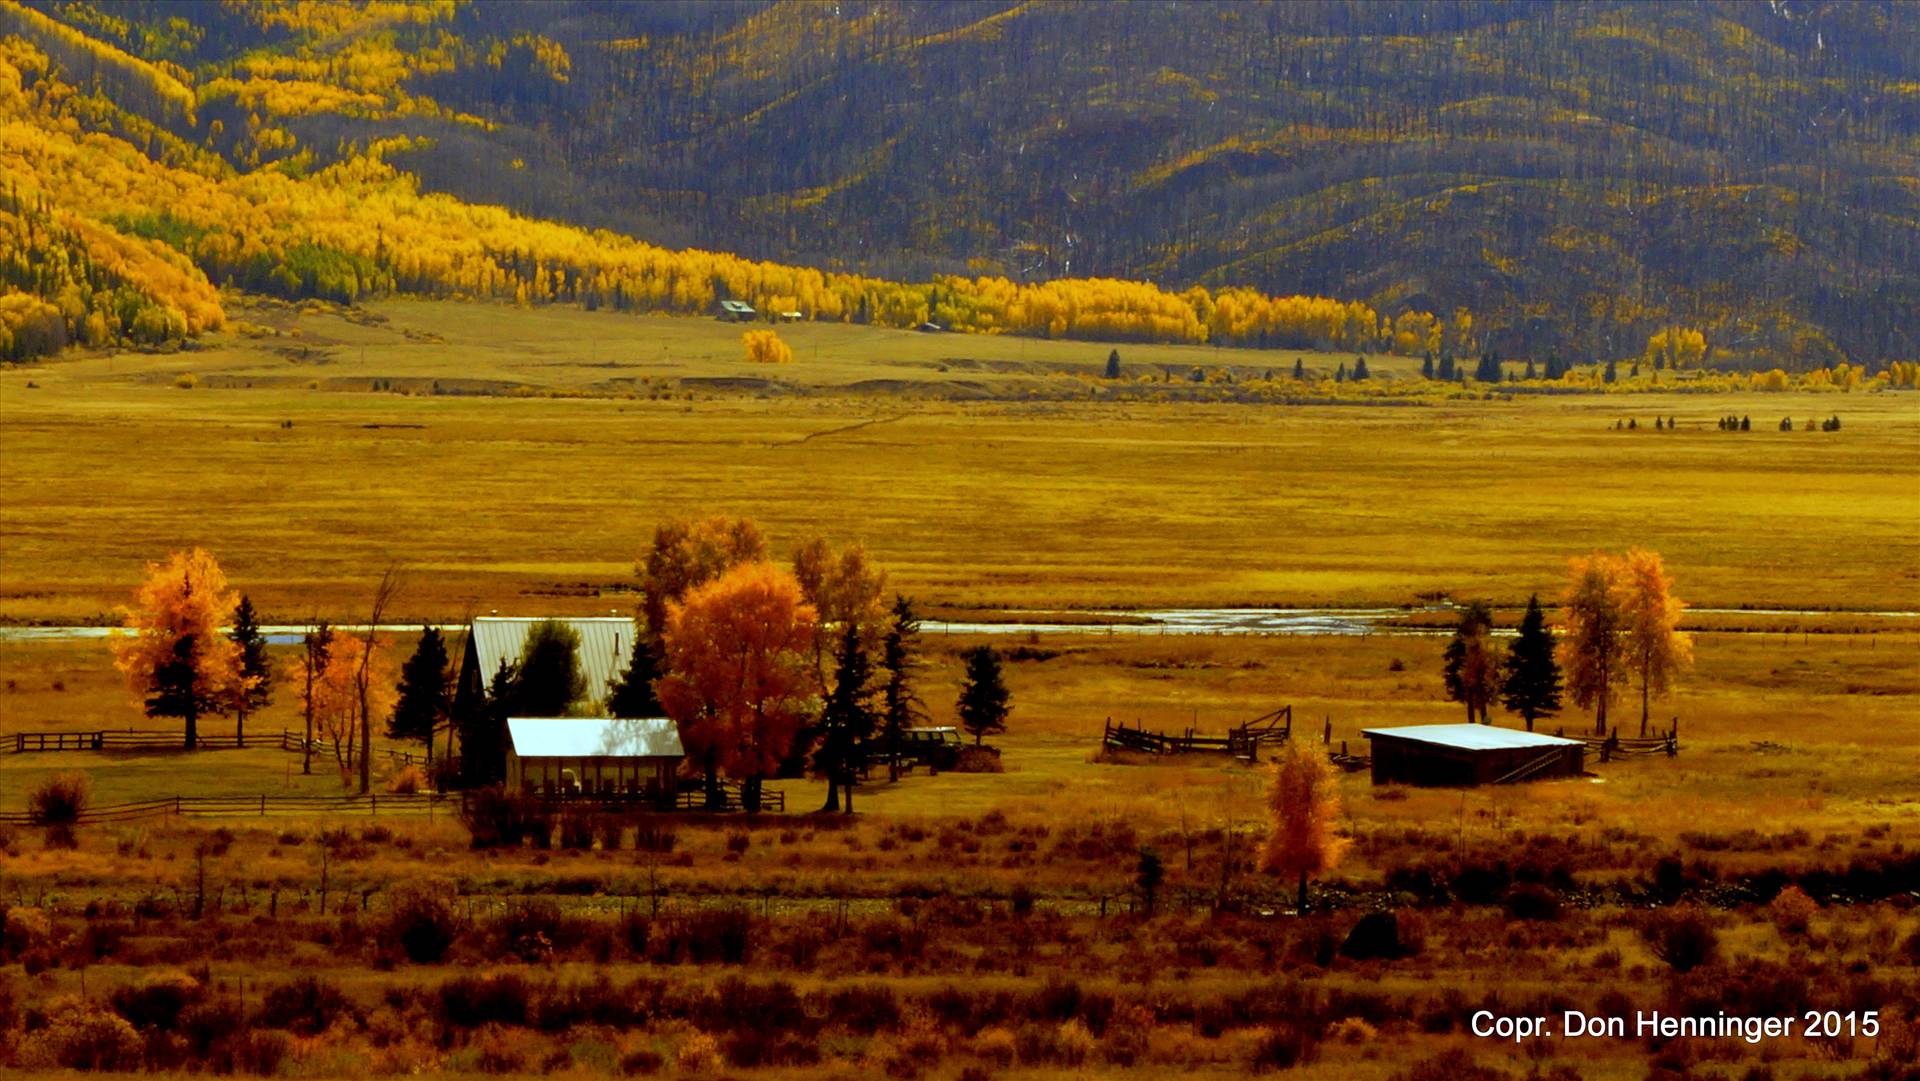 On Golden Ranch Solitary ranch near Creede, Colorado, nestled in a valley along Rio Grande headwaters amid golden and yellow autumn colors of high prairie grasses and aspens. by WPC-360